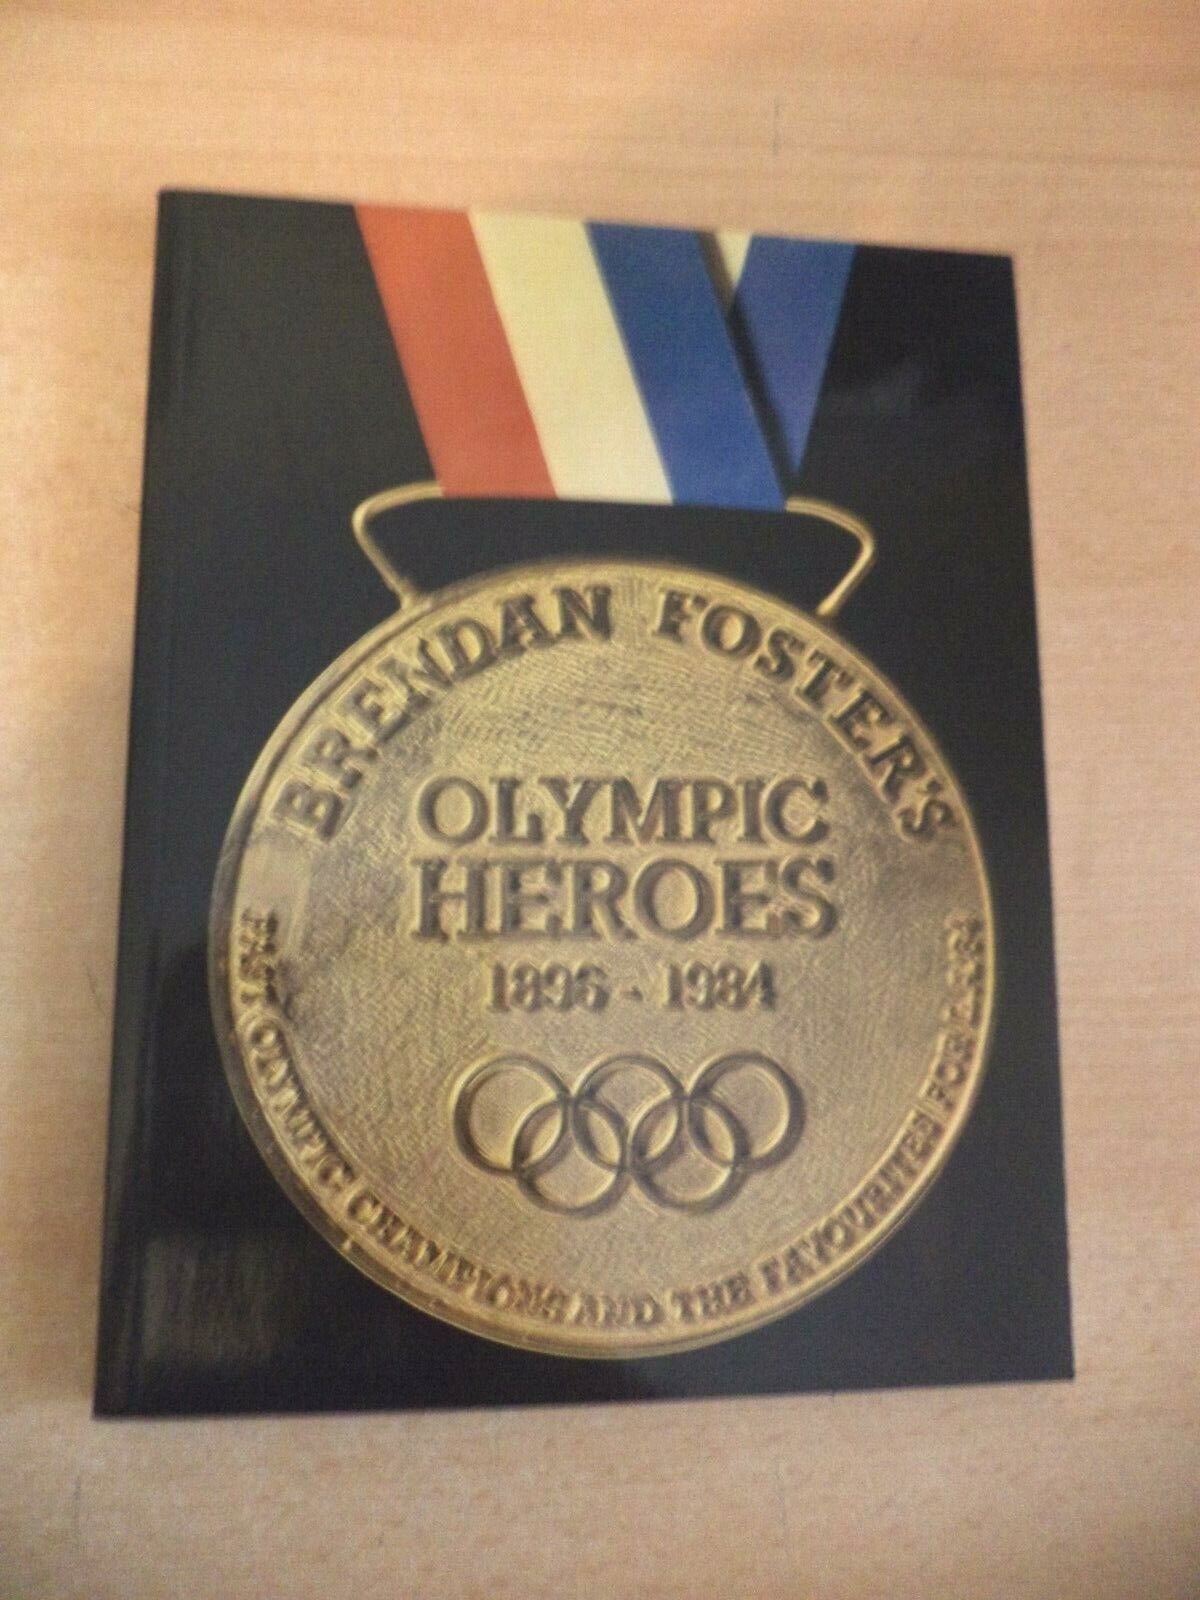 BRENDAN FOSTER OLYMPIC HEROES 1896-1984 old vintage book LA FAVOURITES biography